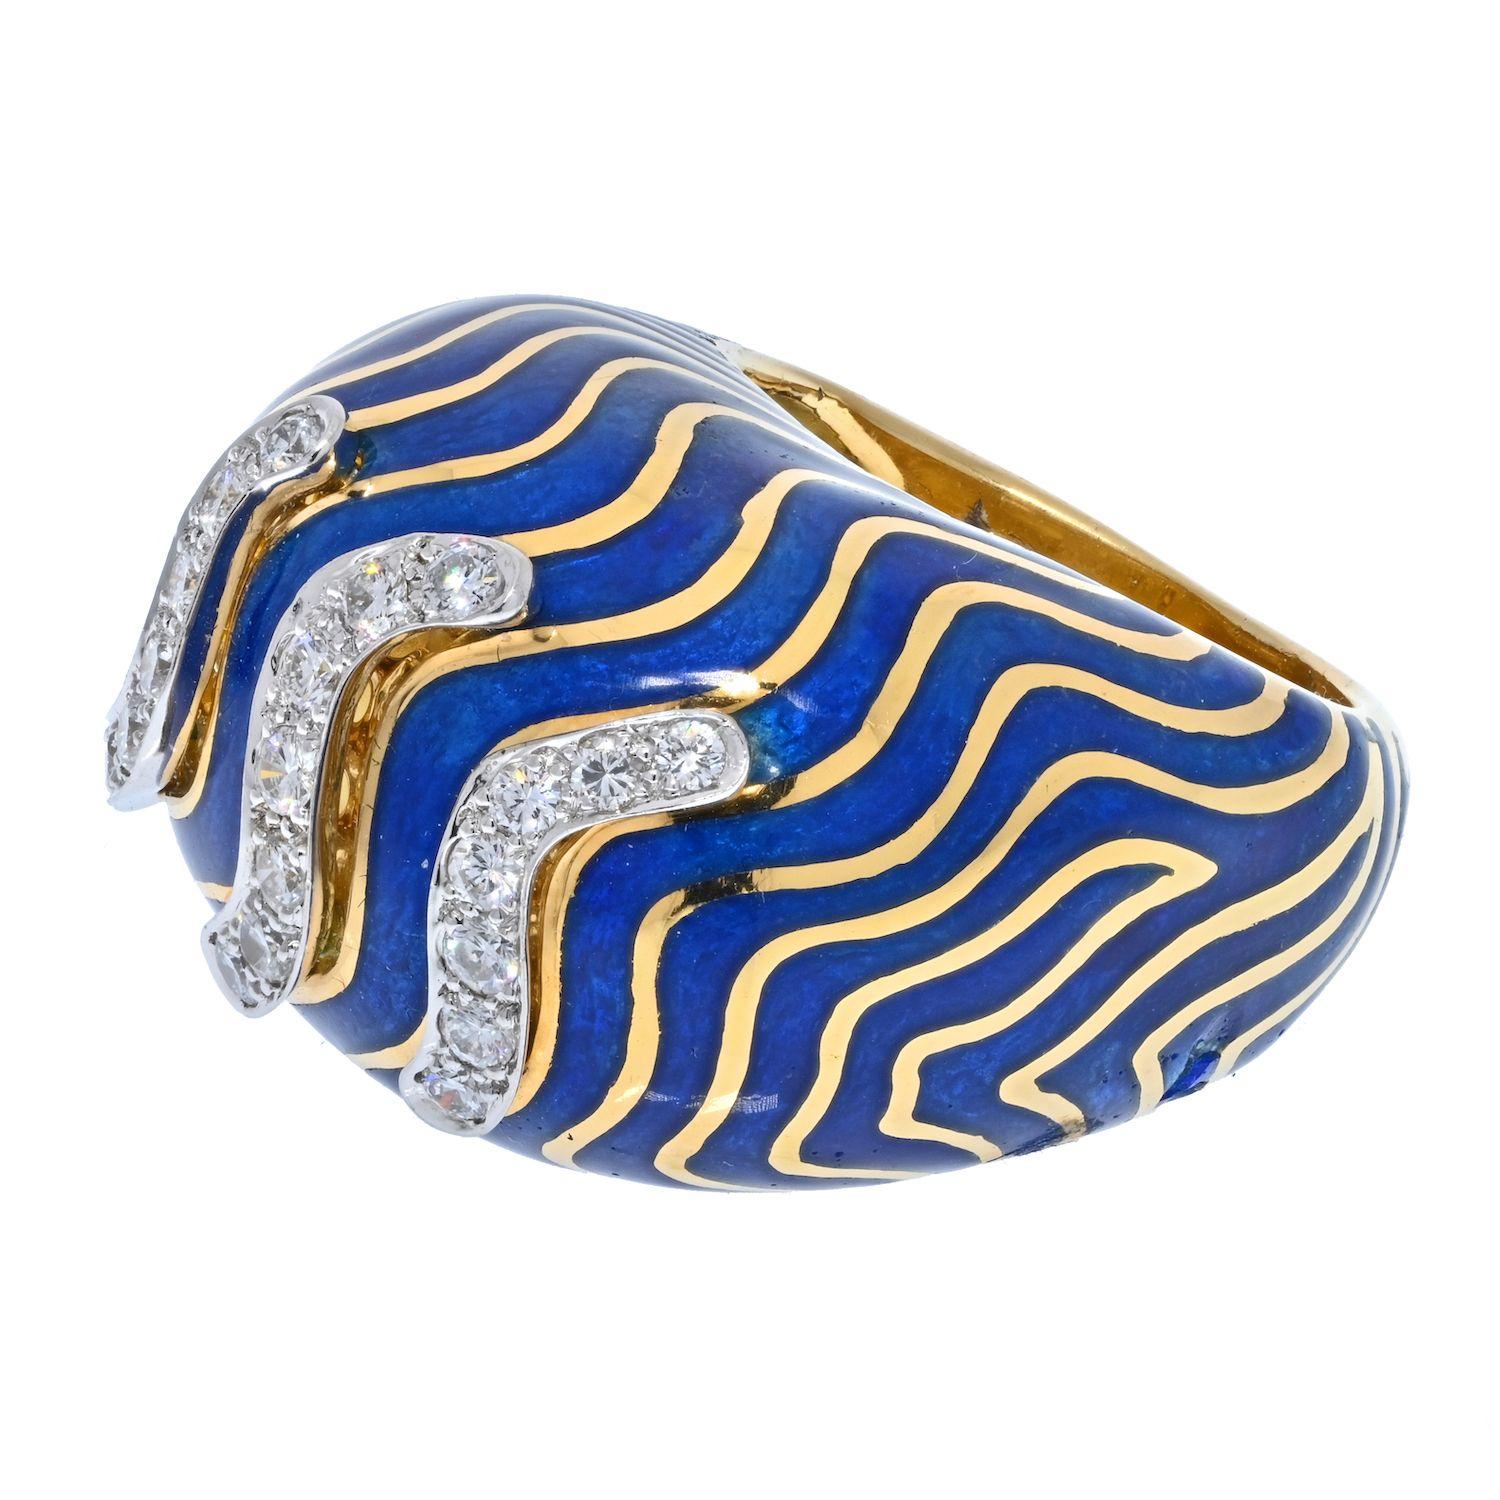 This is a lovely bombe style ring by David Webb designed with blue enameled striped pattern and a touch of round cut diamonds on the top. Perfect cocktail ring to be out and about. You will love the wavy blue enamel top and approx. 0.42ctw in